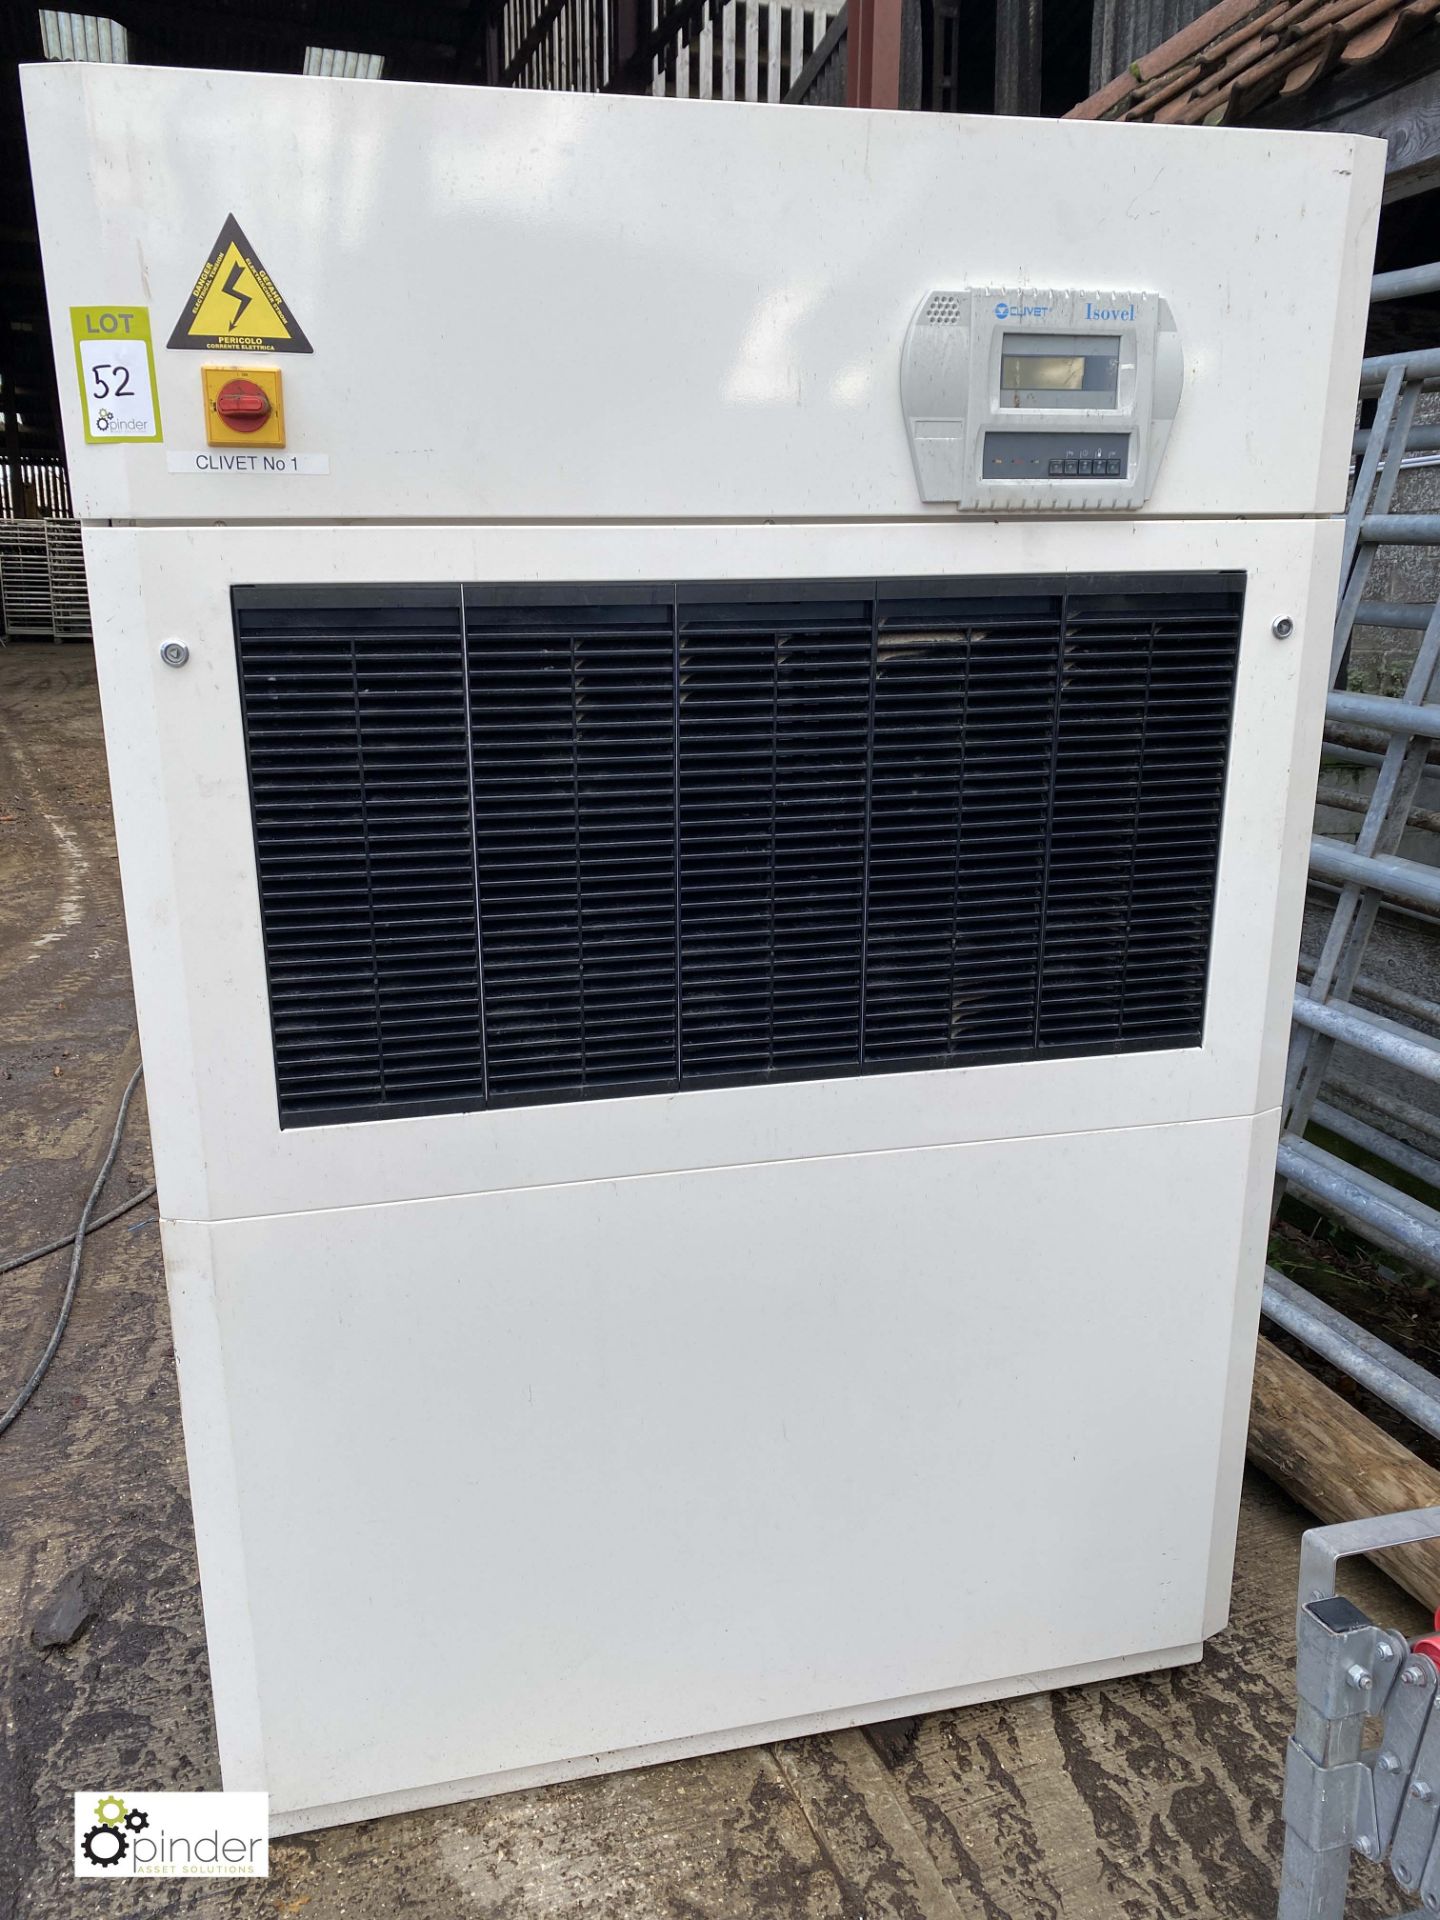 Clivet UCP-DX61 Air Conditioning Unit, year 2017 (LOCATION: Croxton) / (please note this lot has a